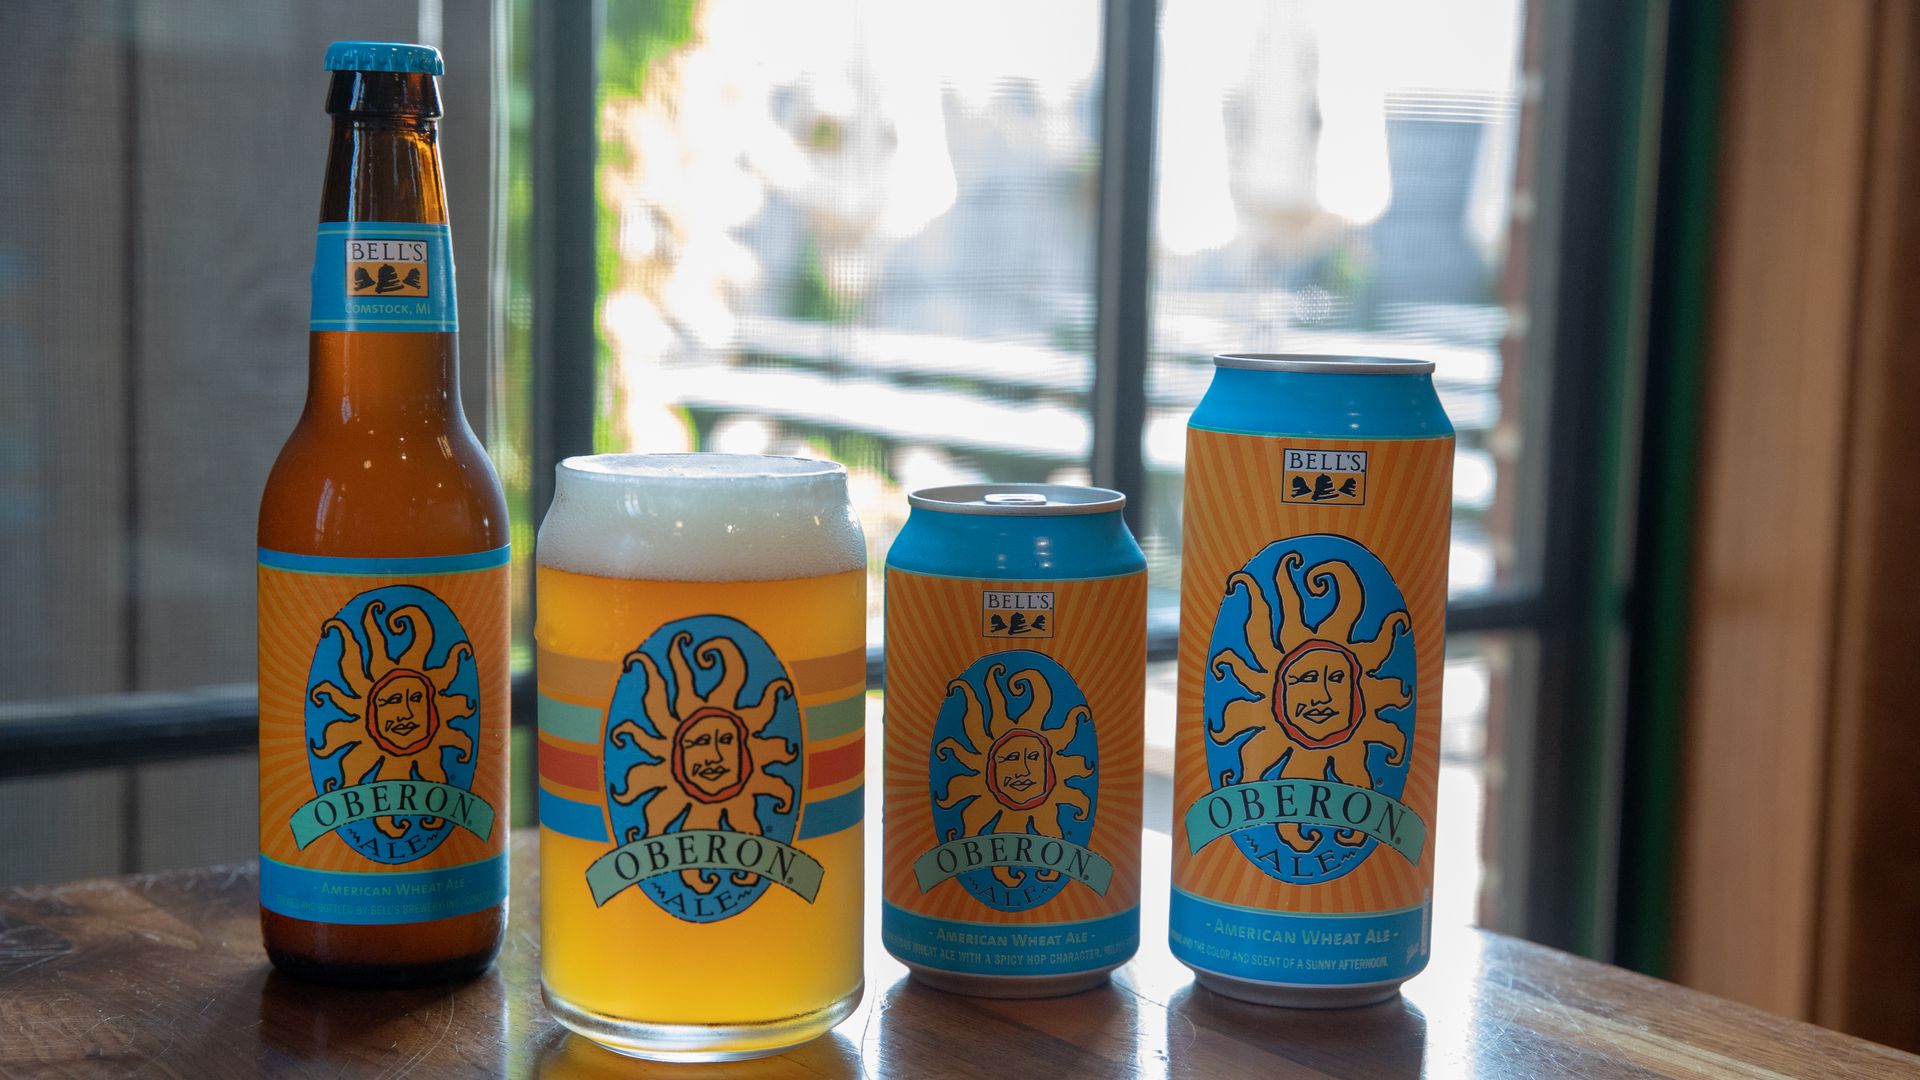 A glass and can of Bell's Oberon beer sits on the bar.